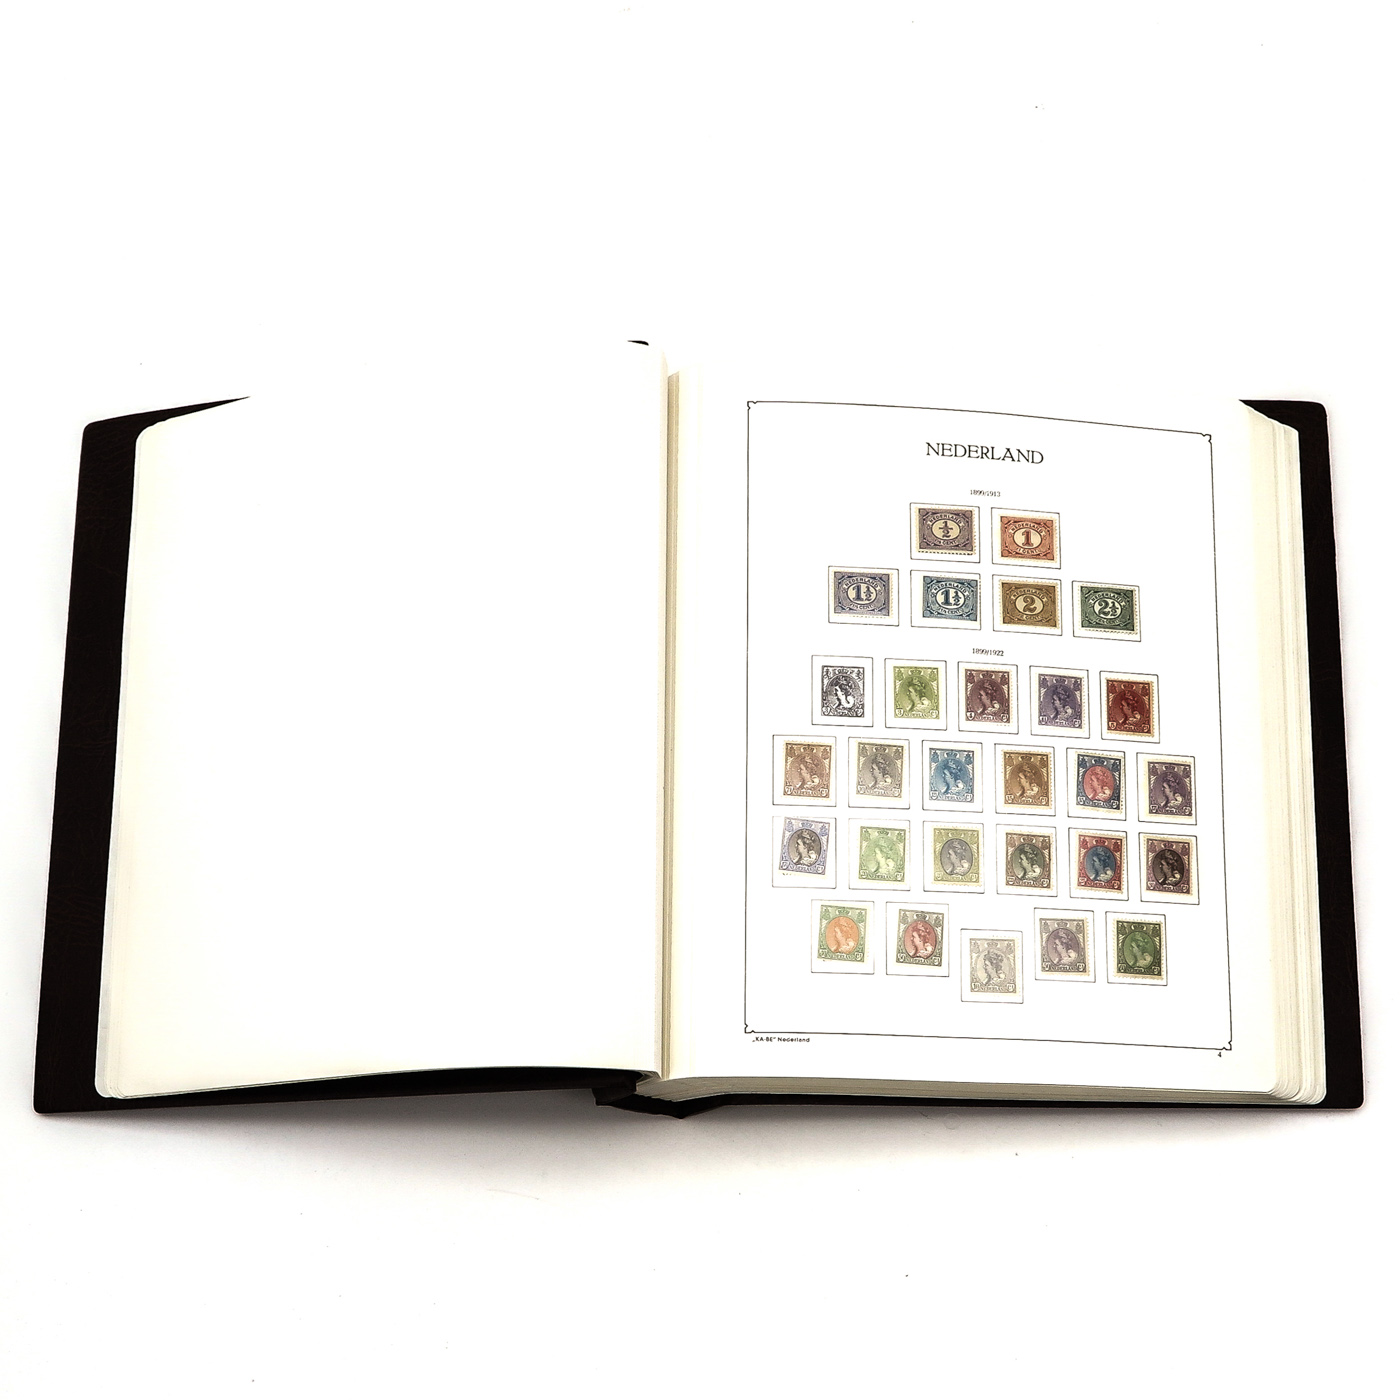 A Very Rare Dutch Stamp Collection - Image 4 of 10